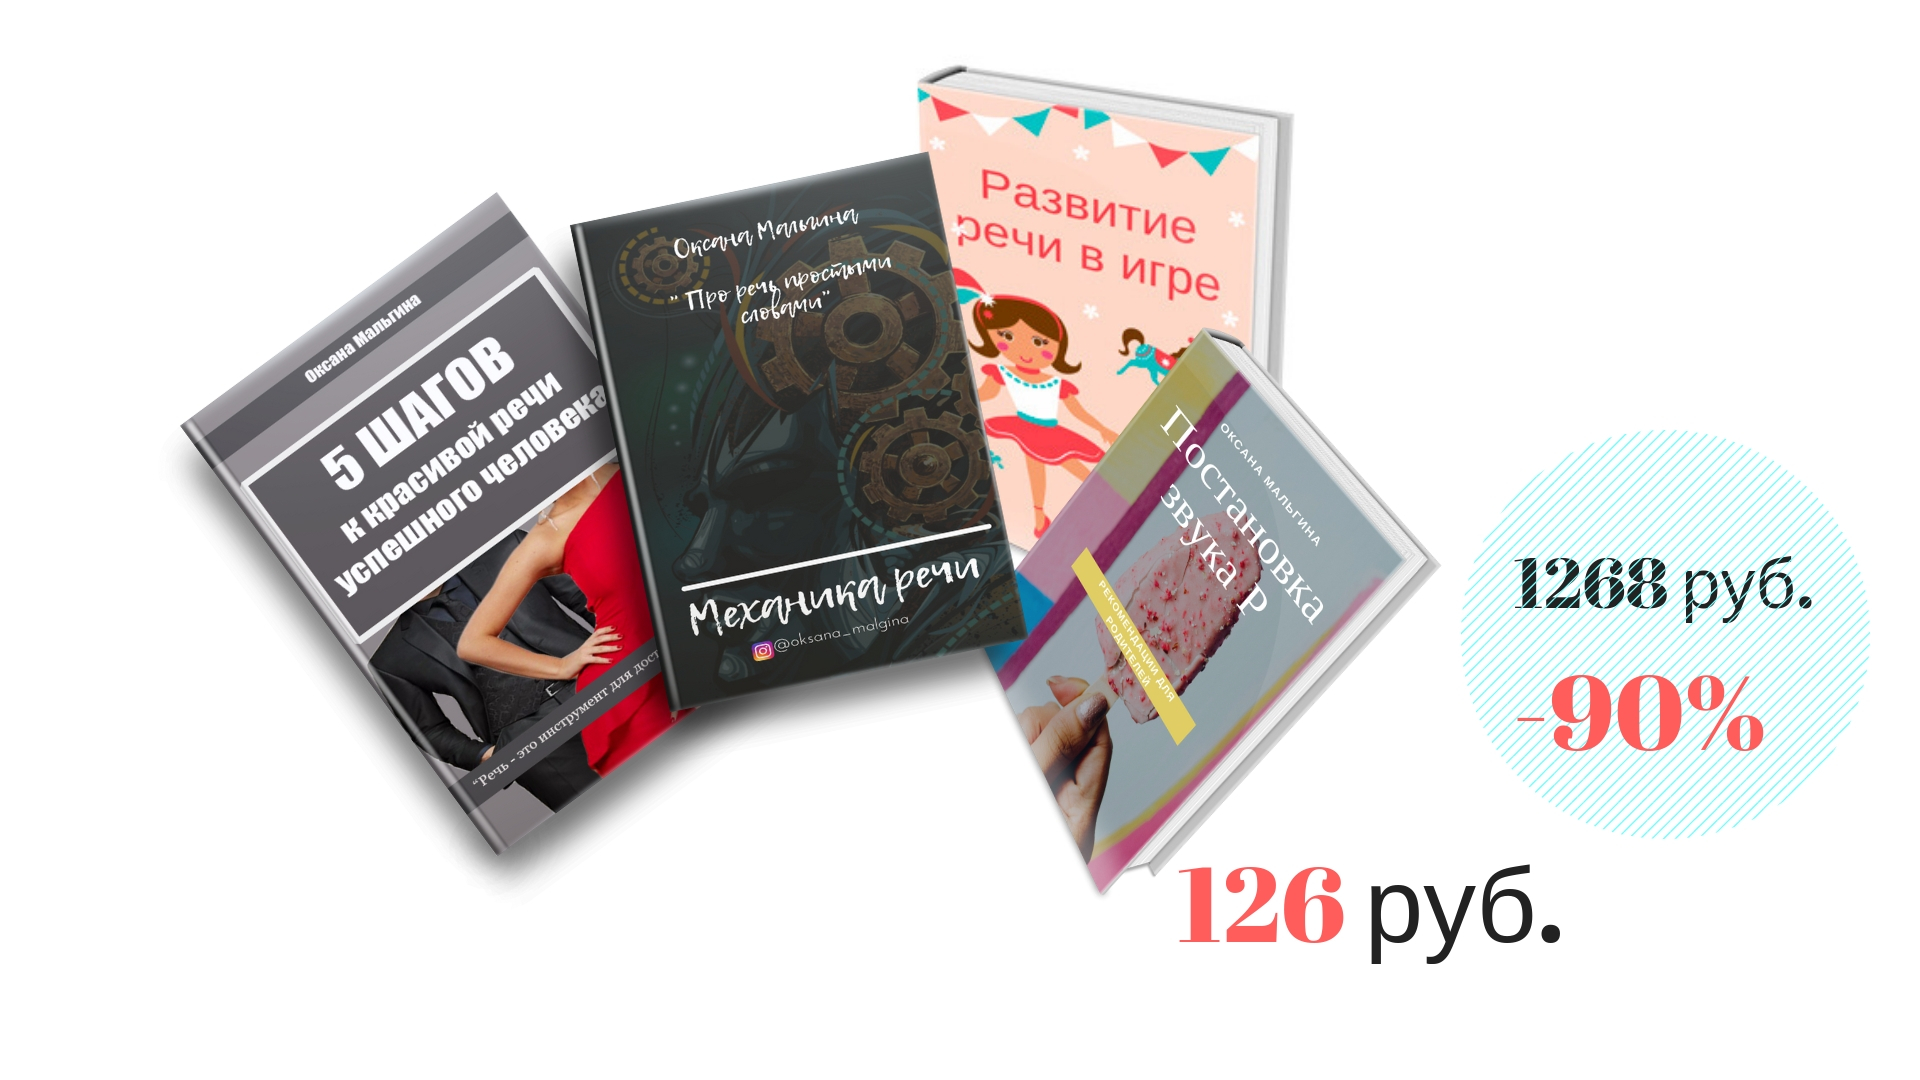 4 books on Promotions -90%